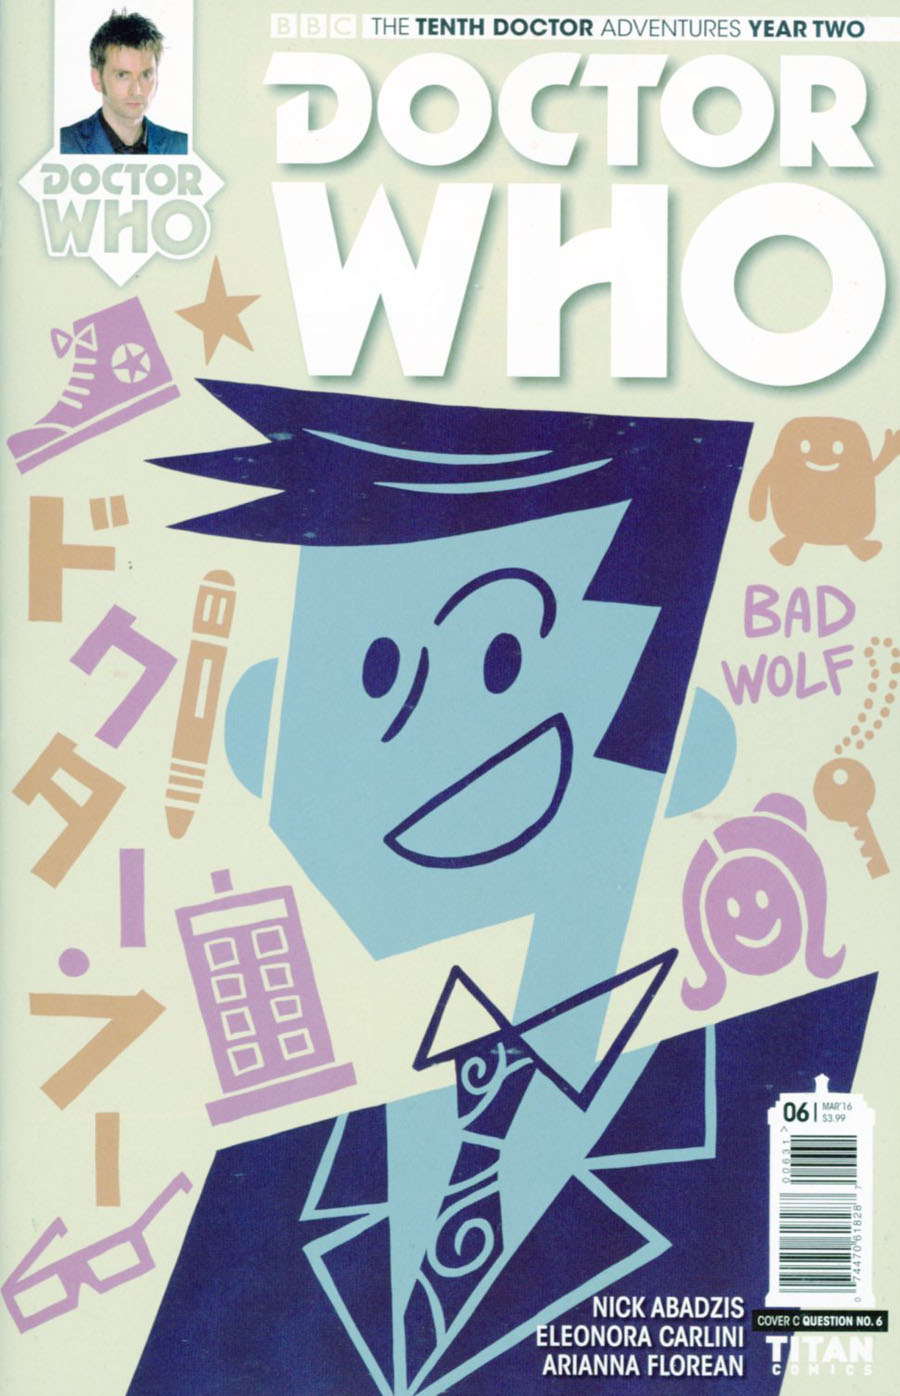 Doctor Who 10th Doctor Year Two #6 Cover C Variant Question No 6 Cover